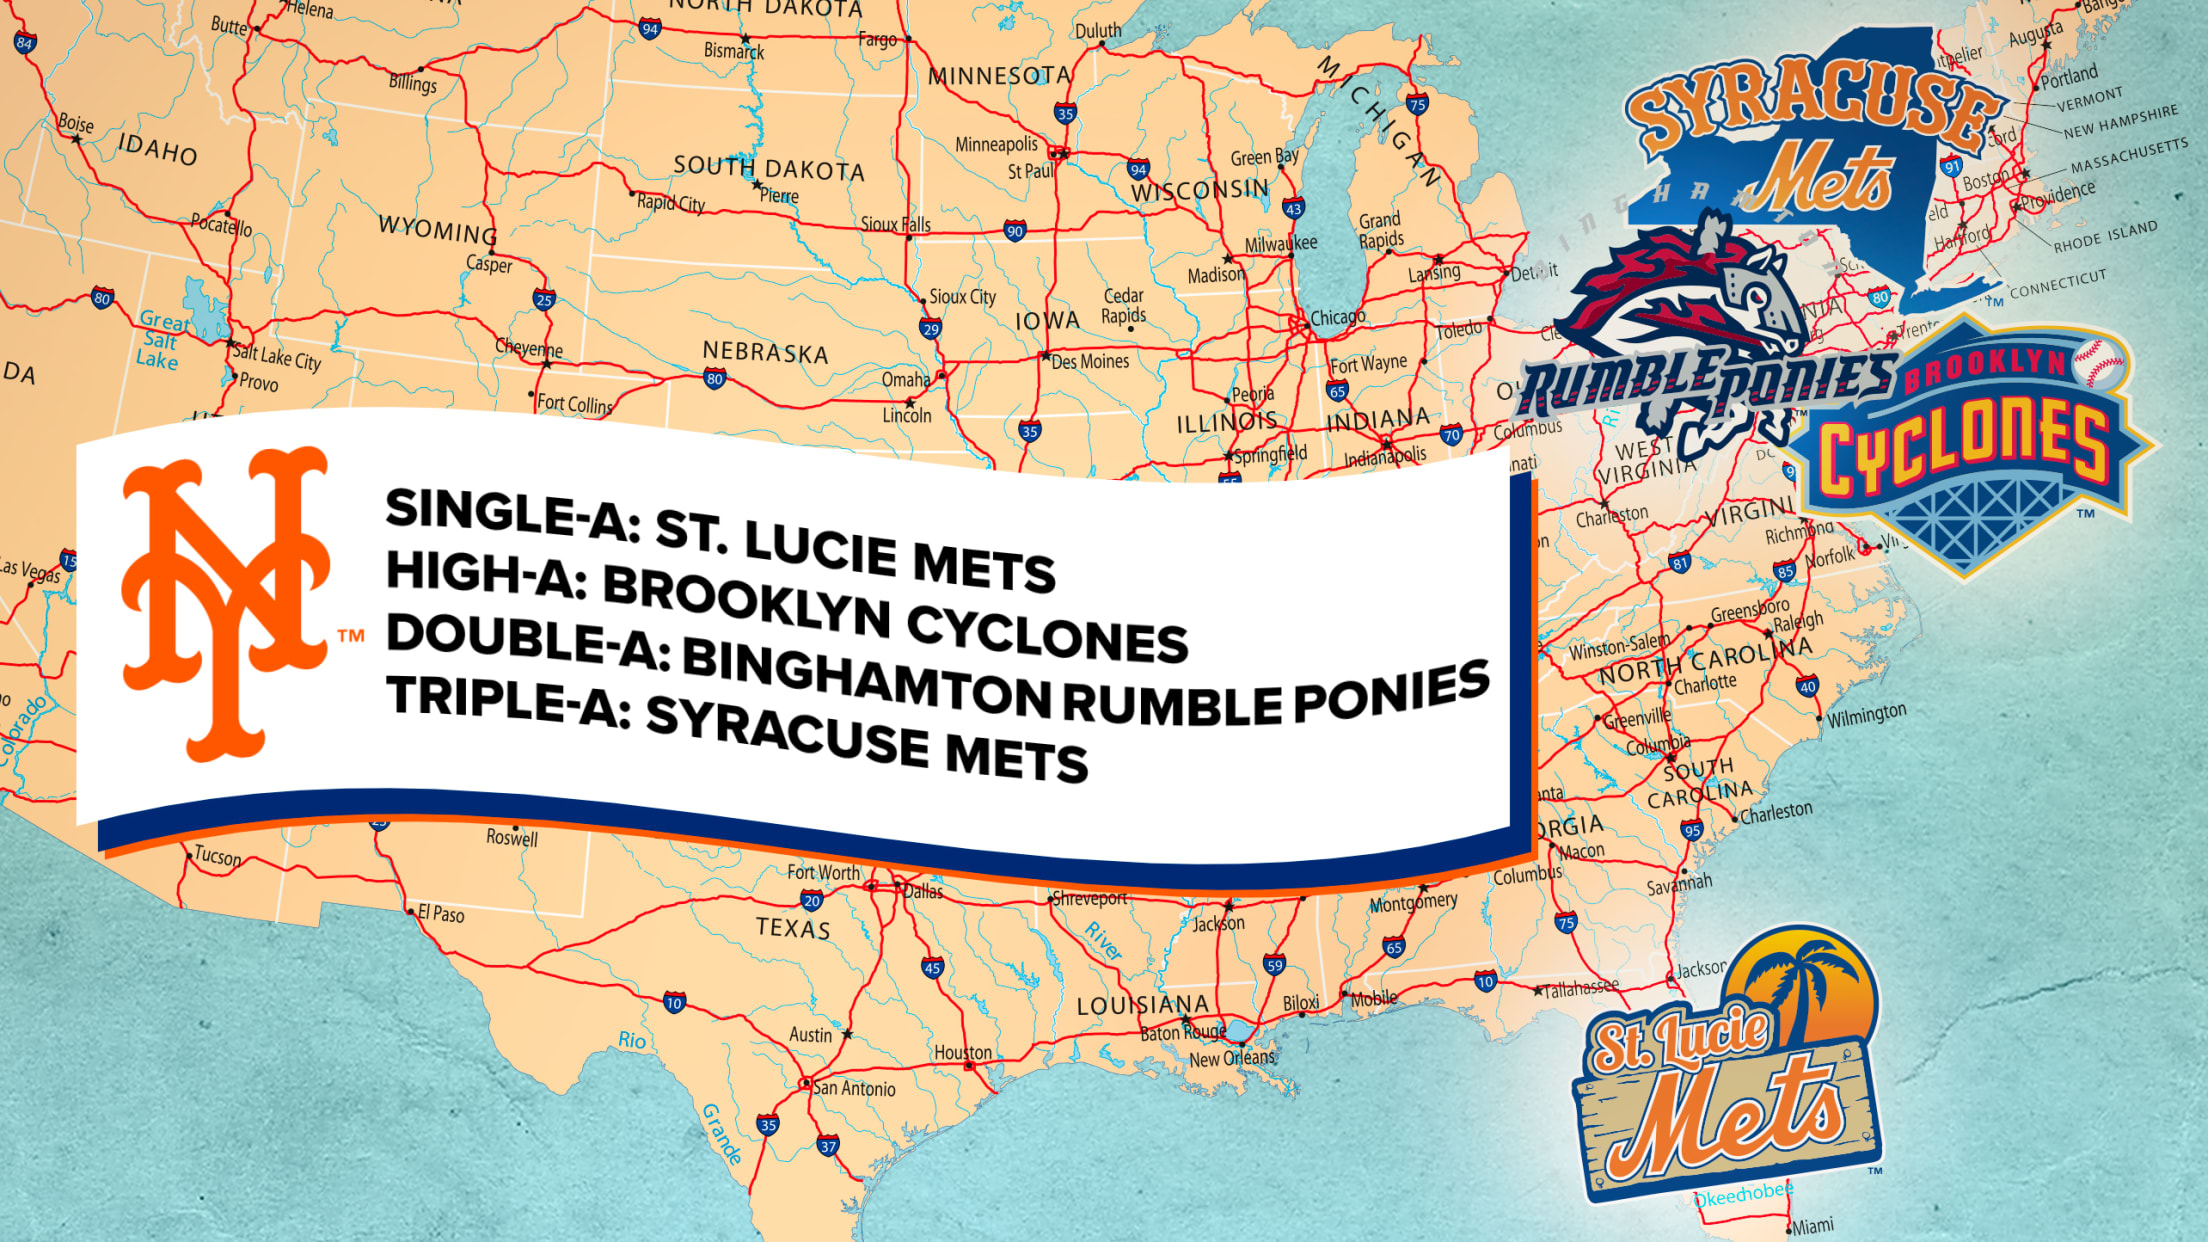 Visit Maimonides Park home of the Brooklyn Cyclones